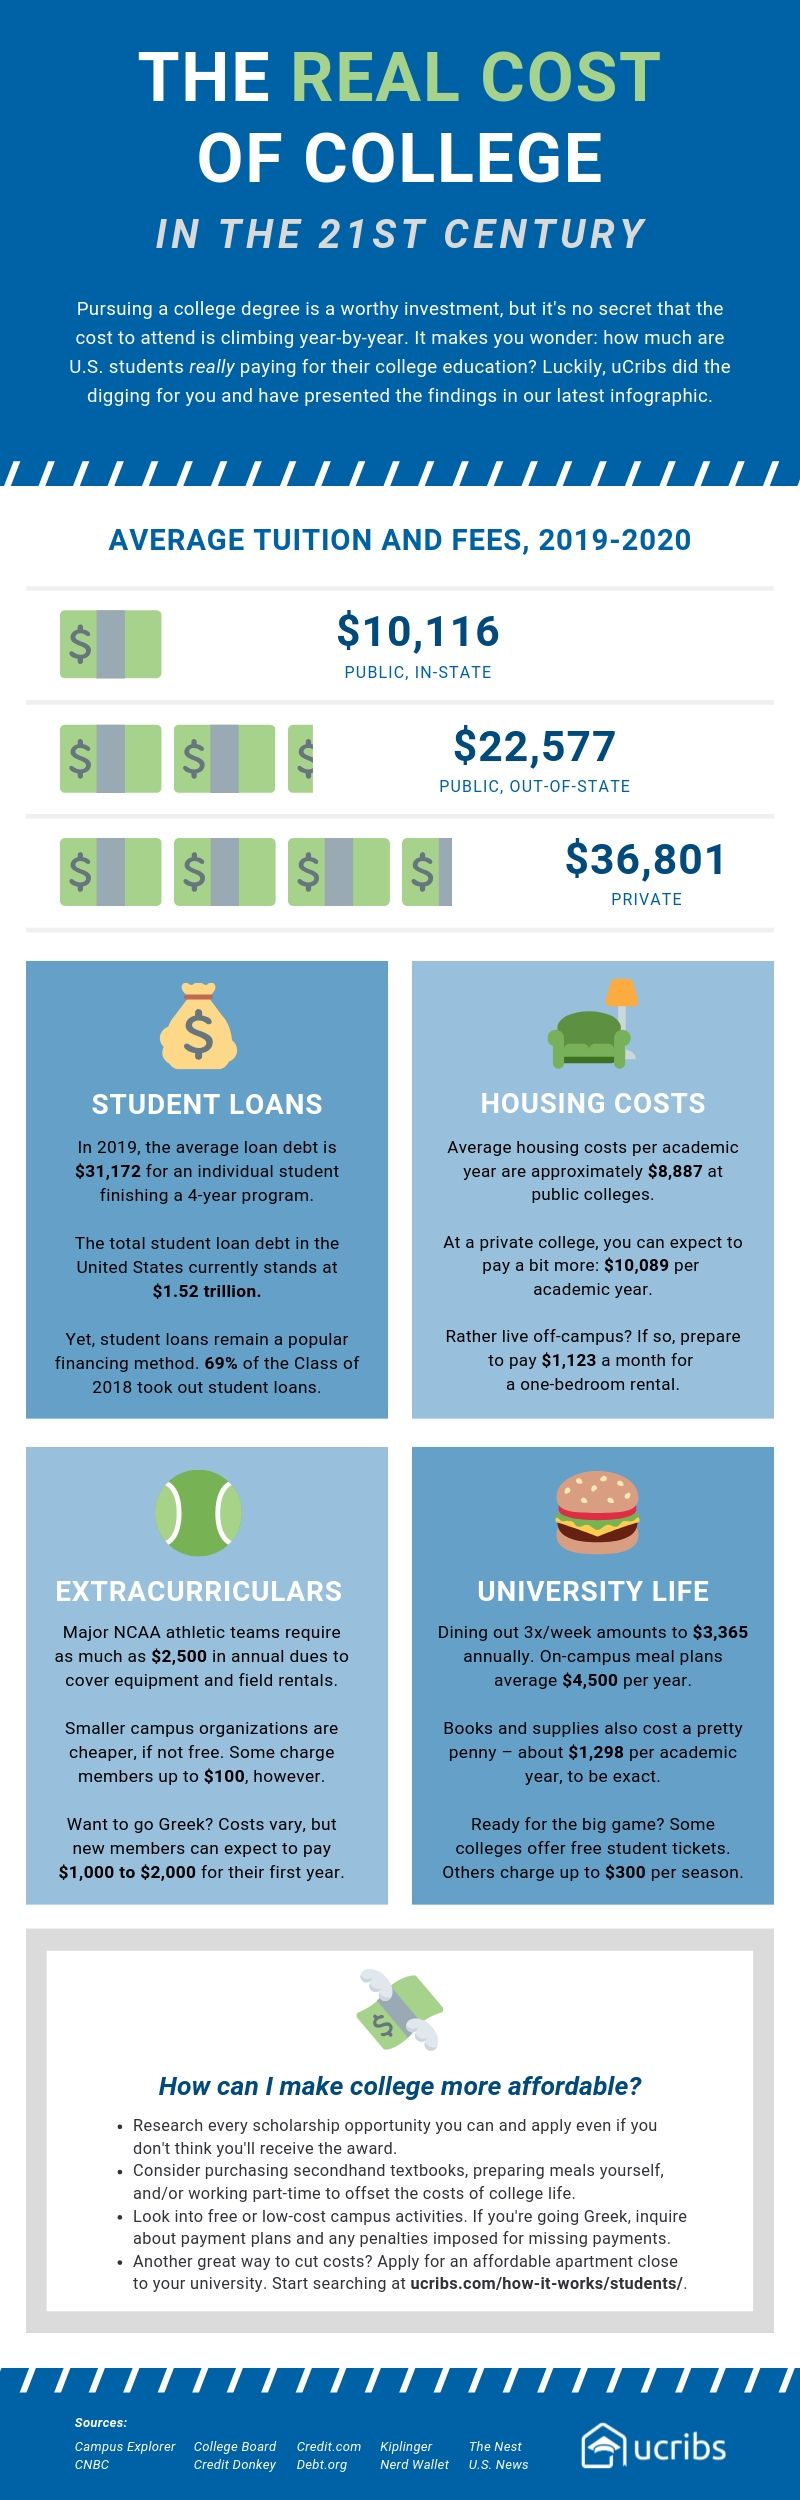 Blog l The Real Cost of College l Infographic l Paying for College l